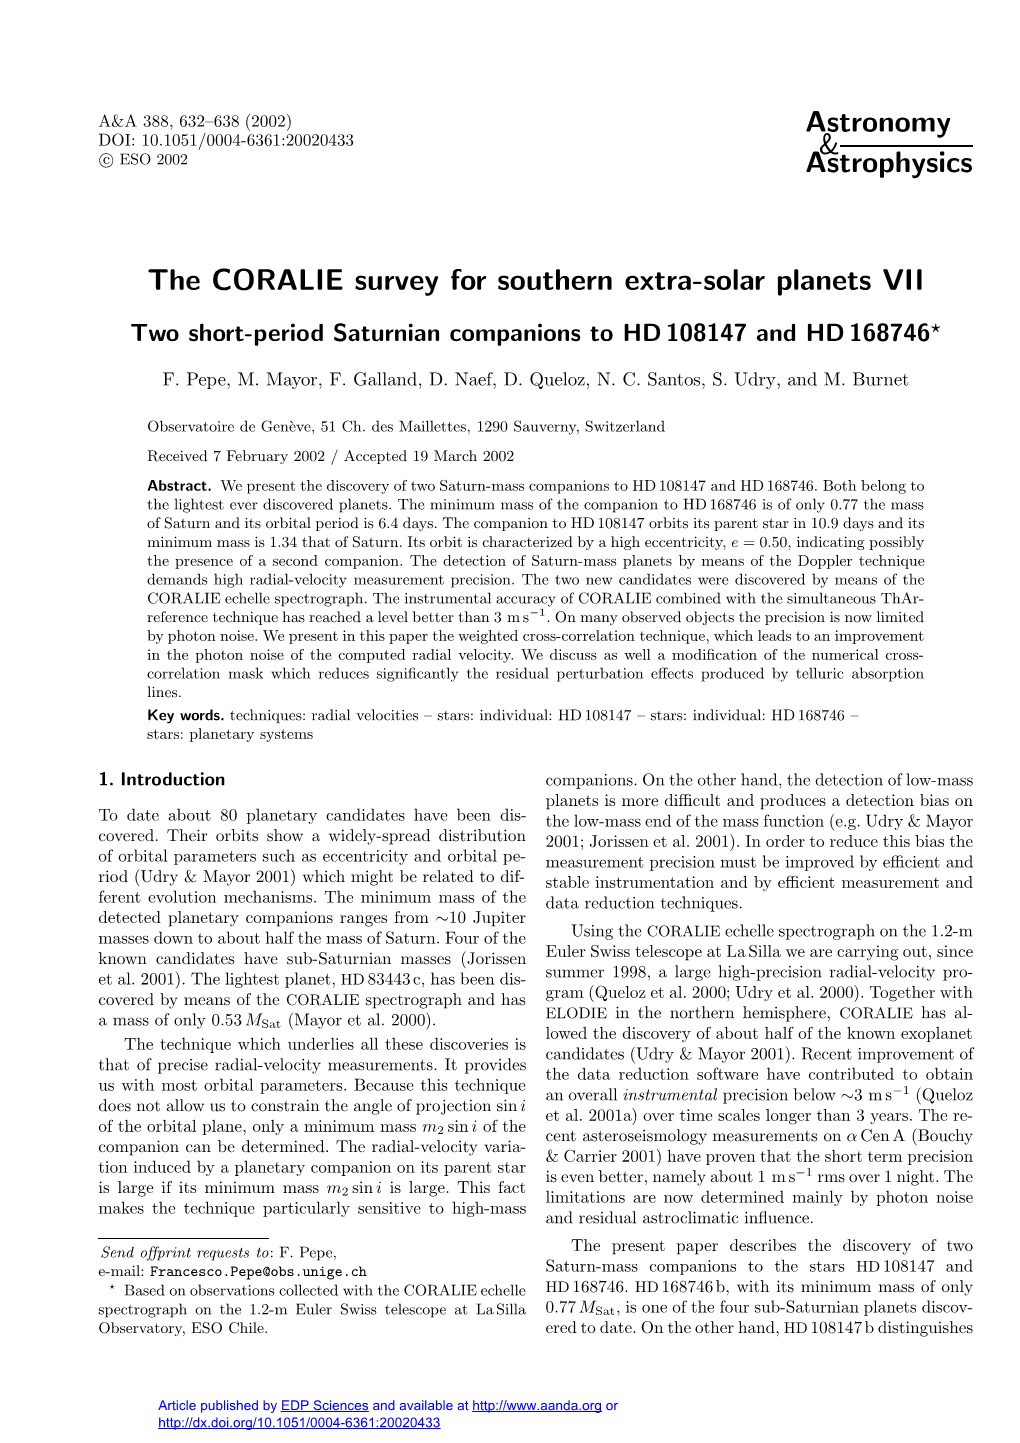 The CORALIE Survey for Southern Extra-Solar Planets VII